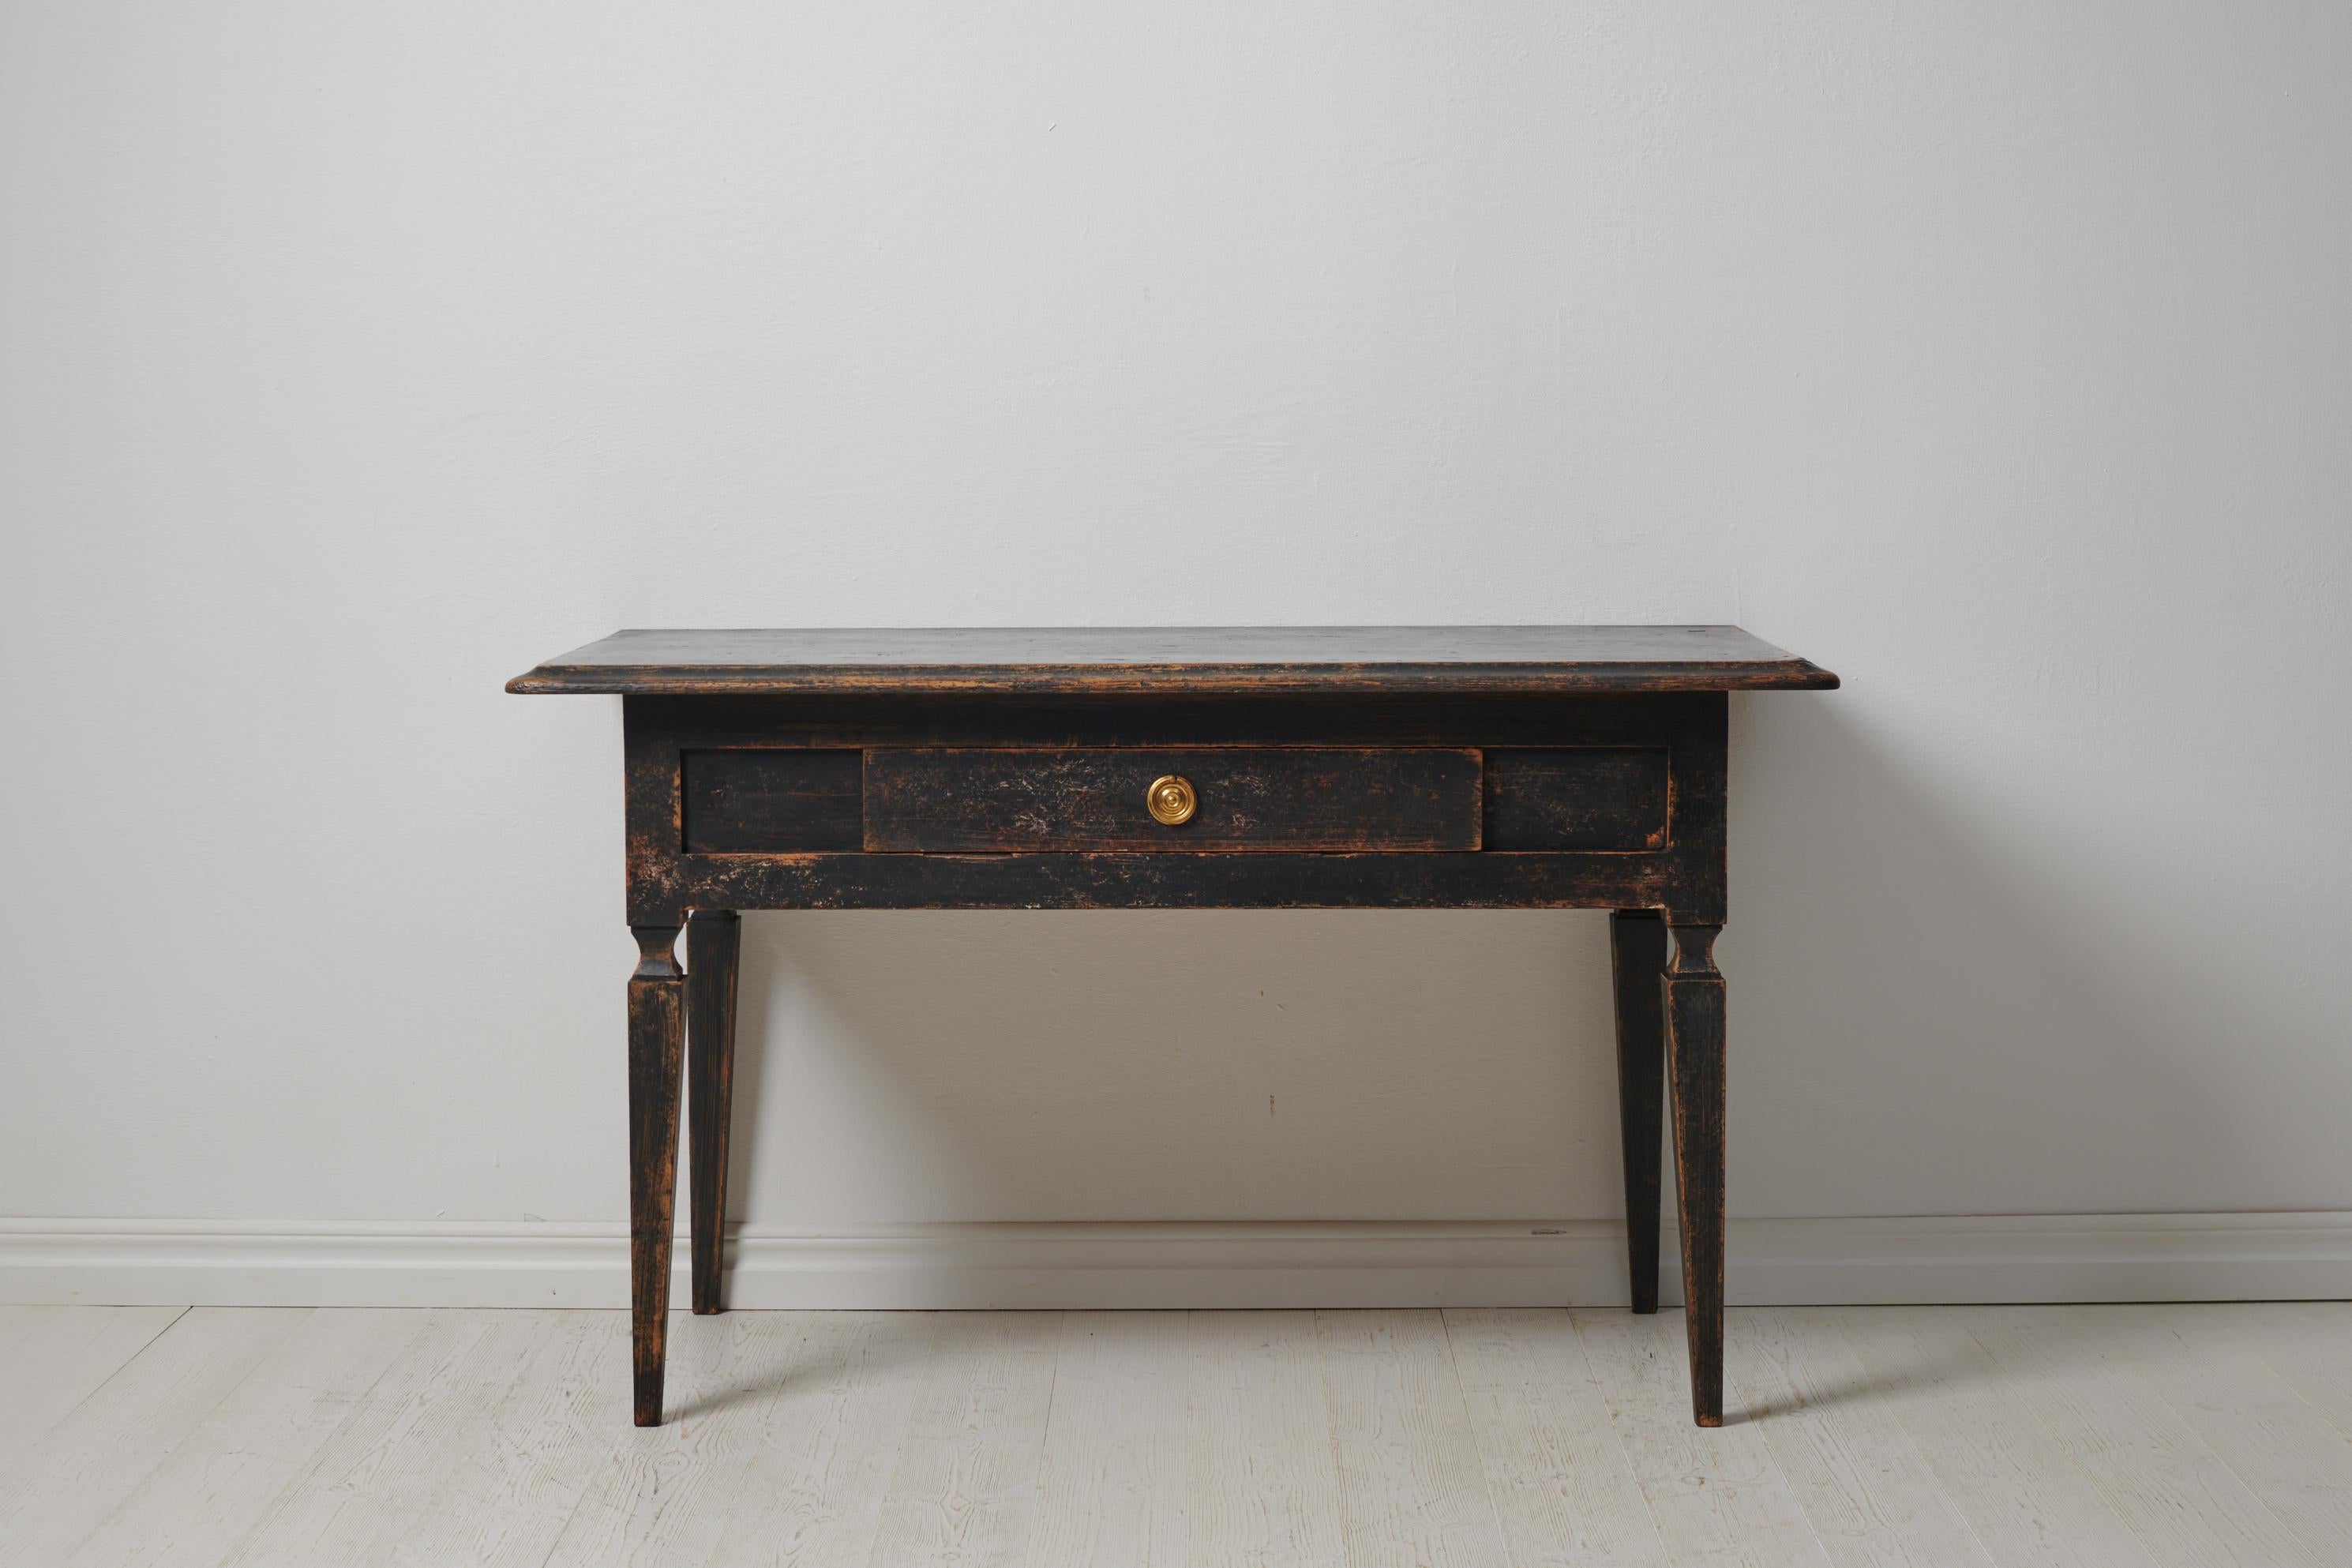 Antique Swedish gustavian table. The table is a genuine country house furniture from the 1820s. Straight tapered legs and a drawer in the apron. The apron is decorated with rectangular panels. The paint has distress with patina and the pine